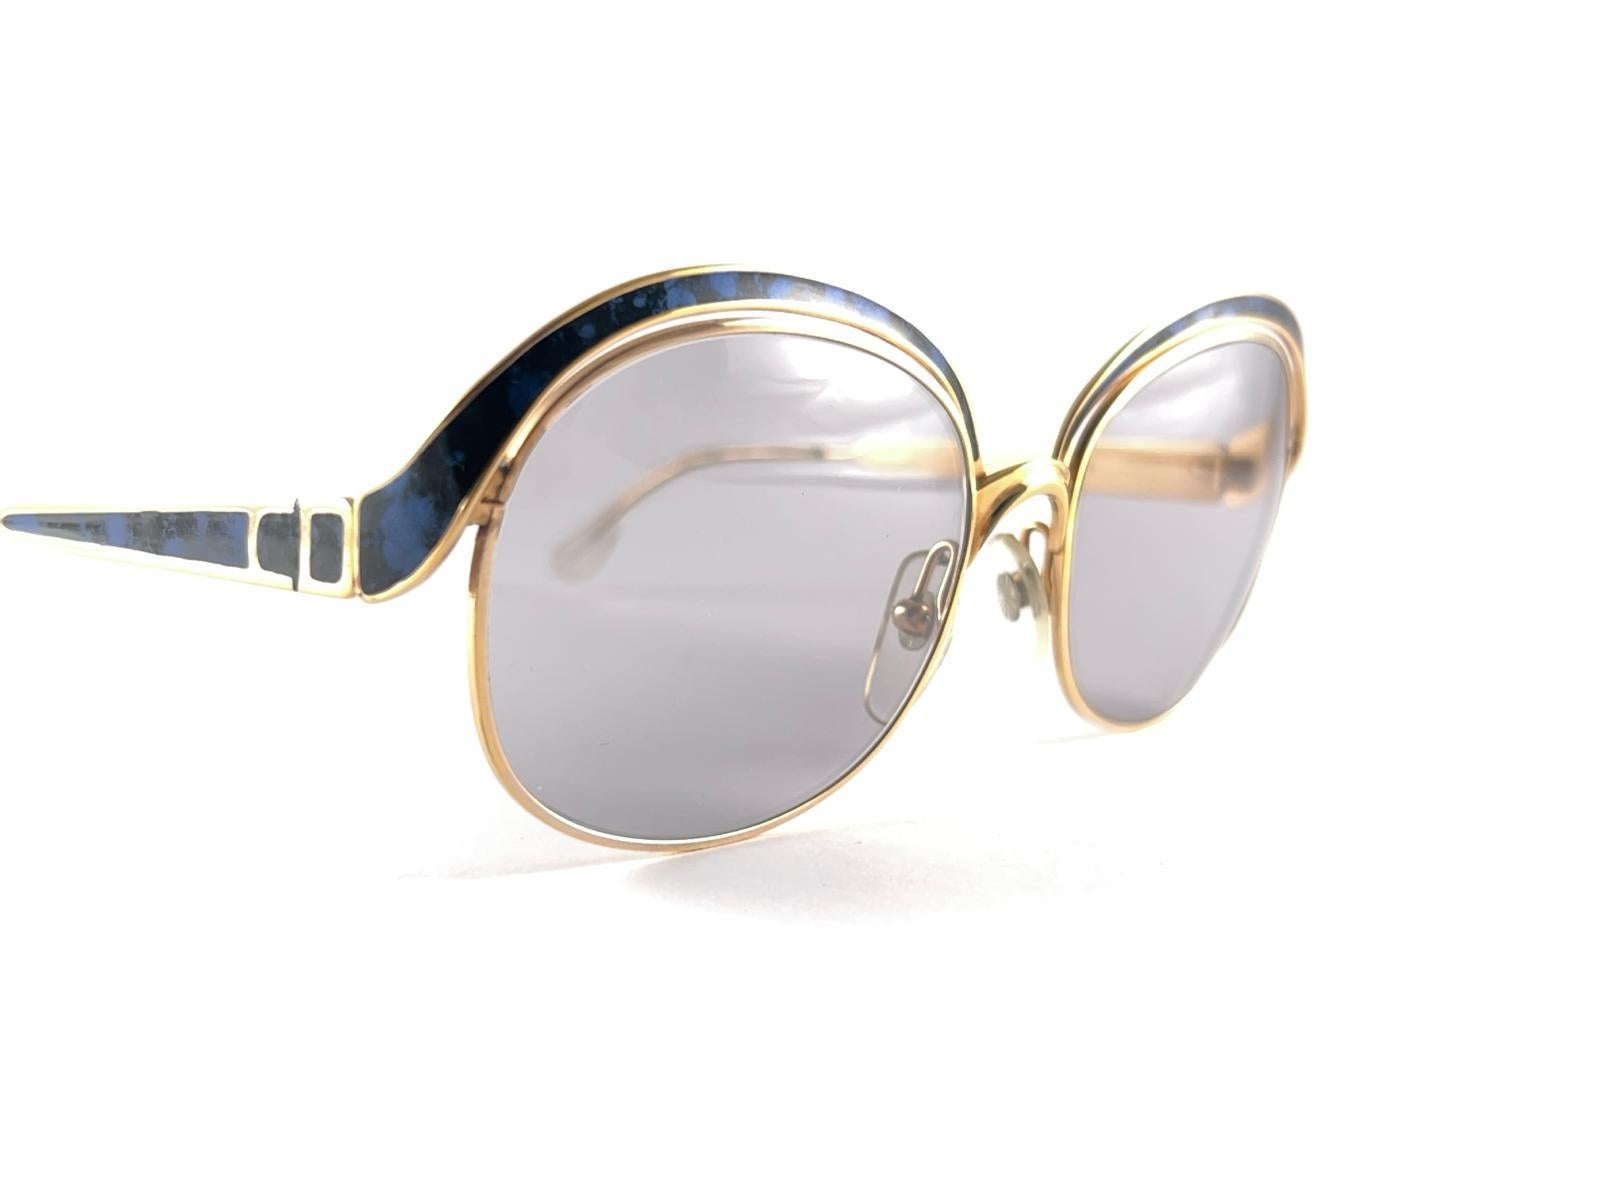 
Vintage Christian Dior Sunglasses. Enamel Blue Marbled Details Over A Gold Frame.
Spotless Ligth Grey Lenses.
This Item Show Minor Sign Of Wear Please Study The Pictures Before Purchasing


Made In Austria



Front                                  